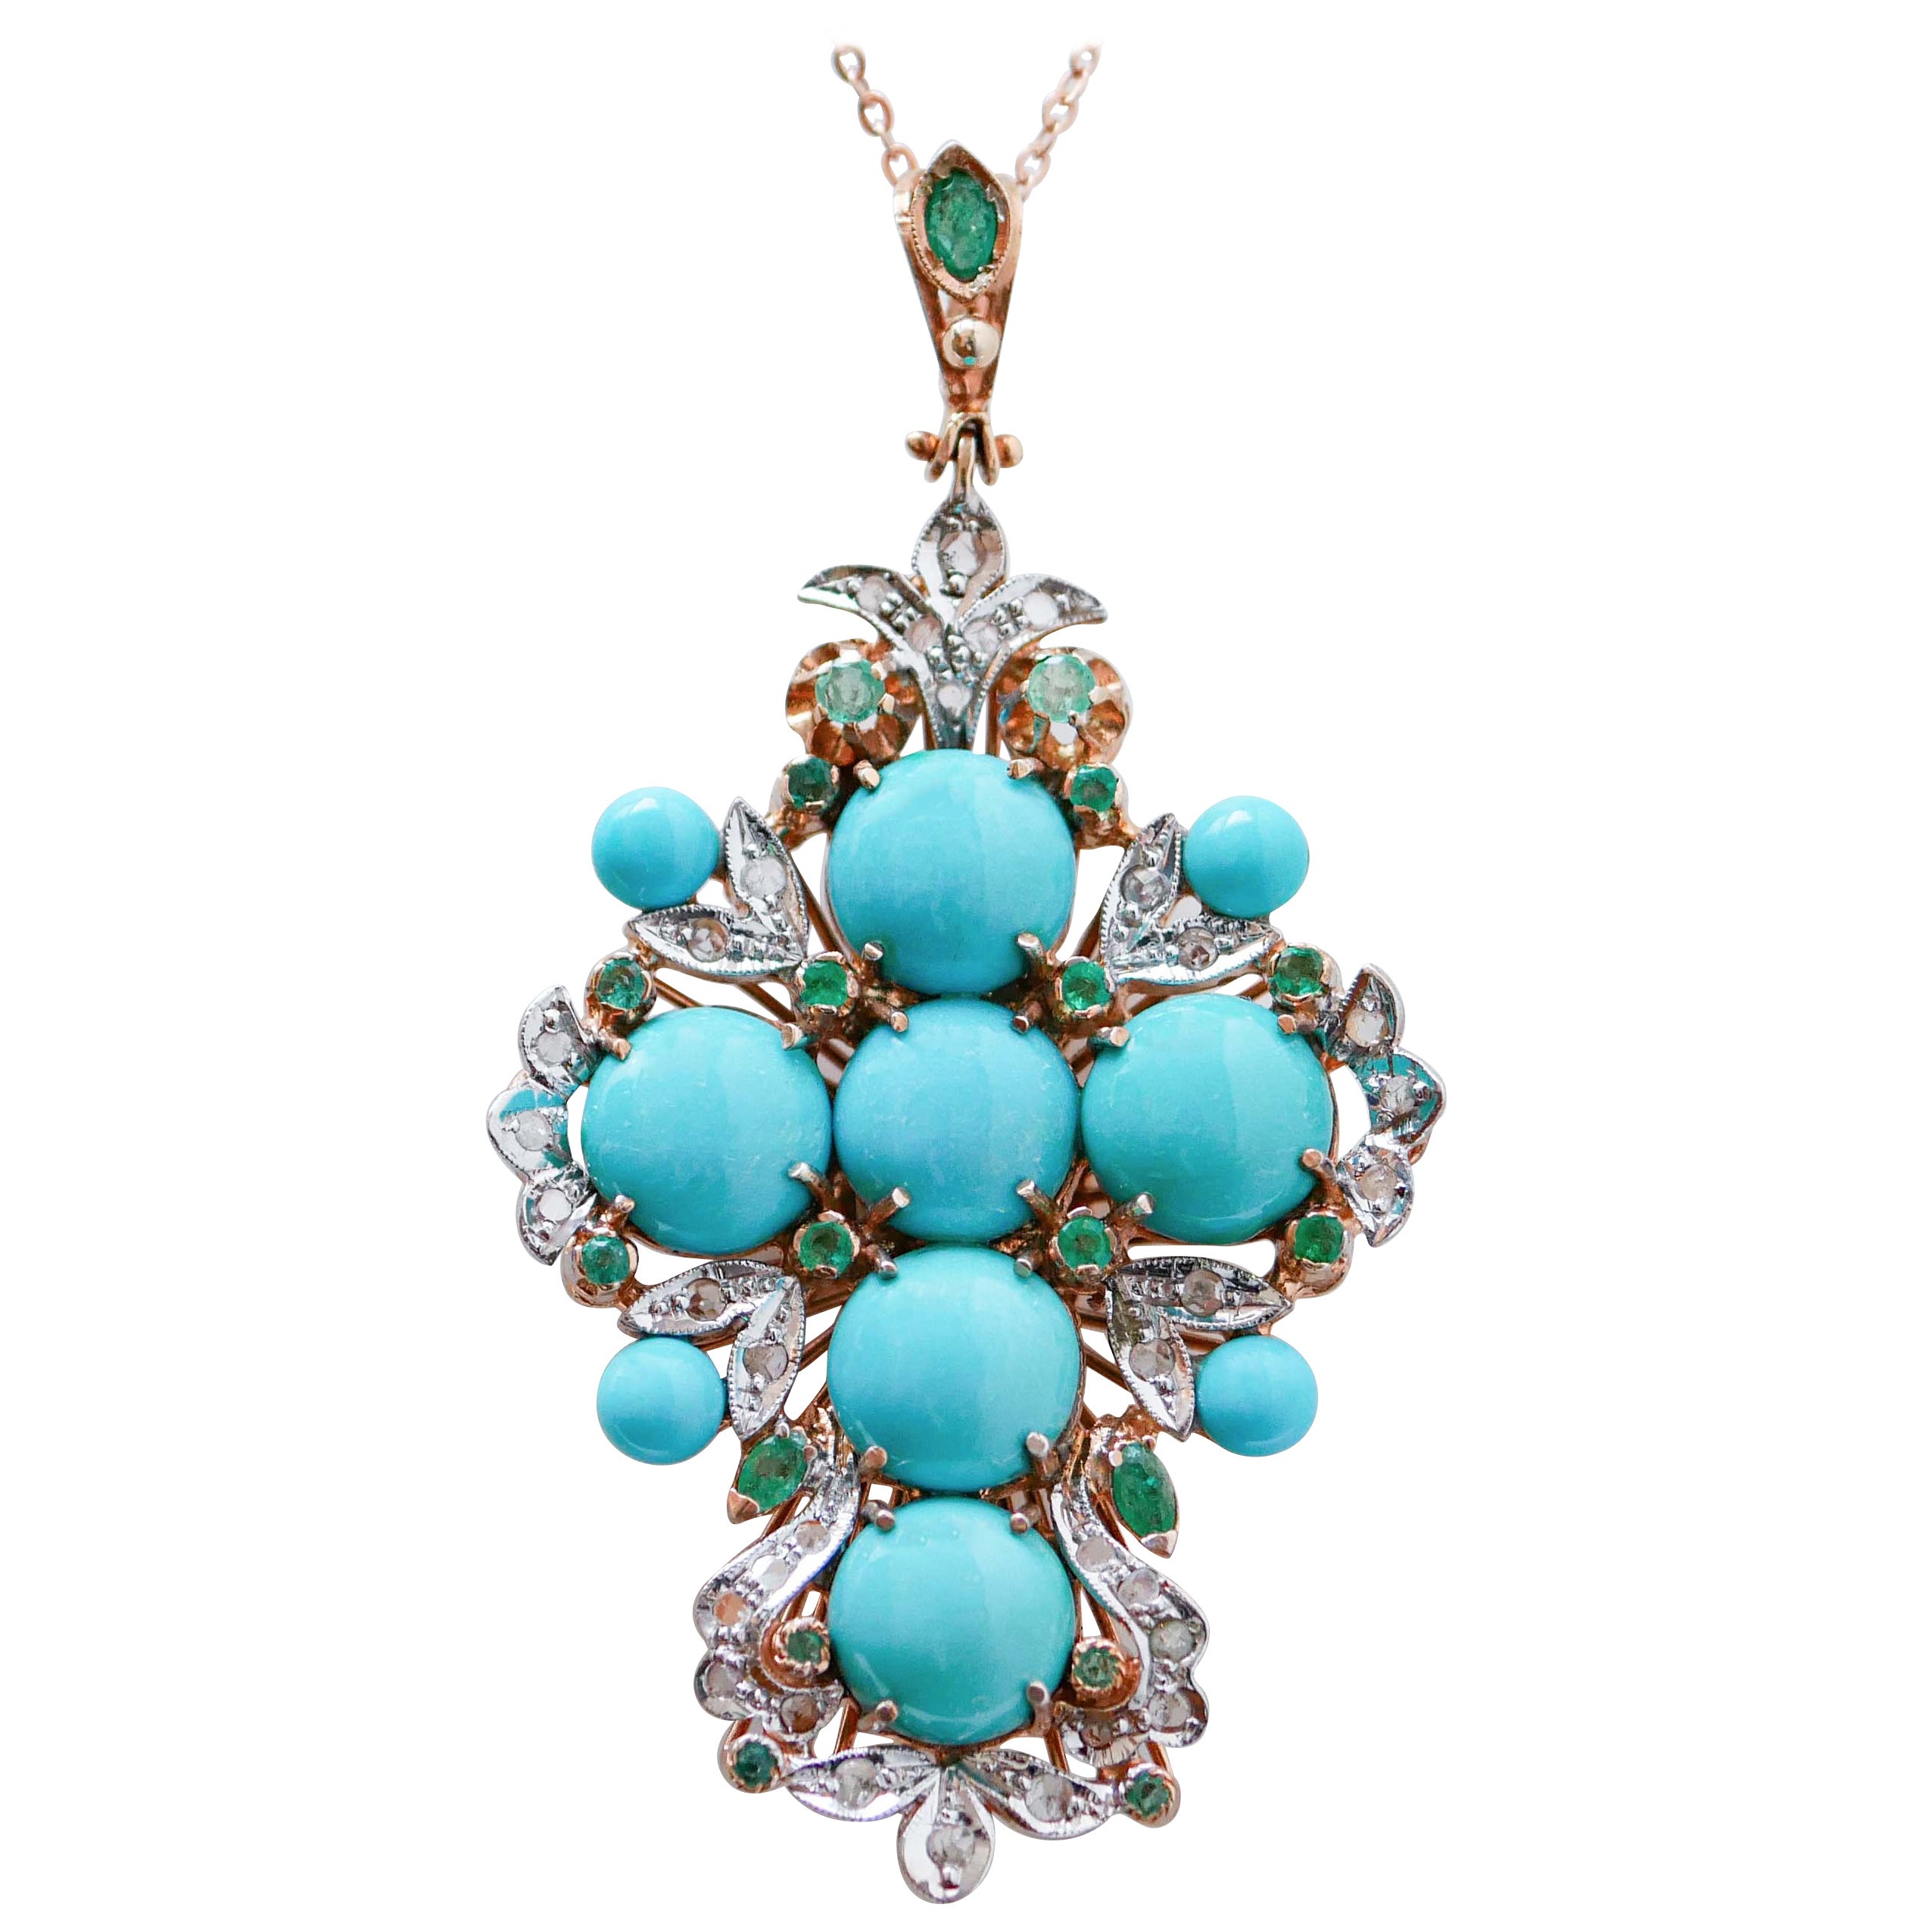 Turquoise, Emeralds, Diamonds, Rose Gold and Silver Cross Pendant Necklace